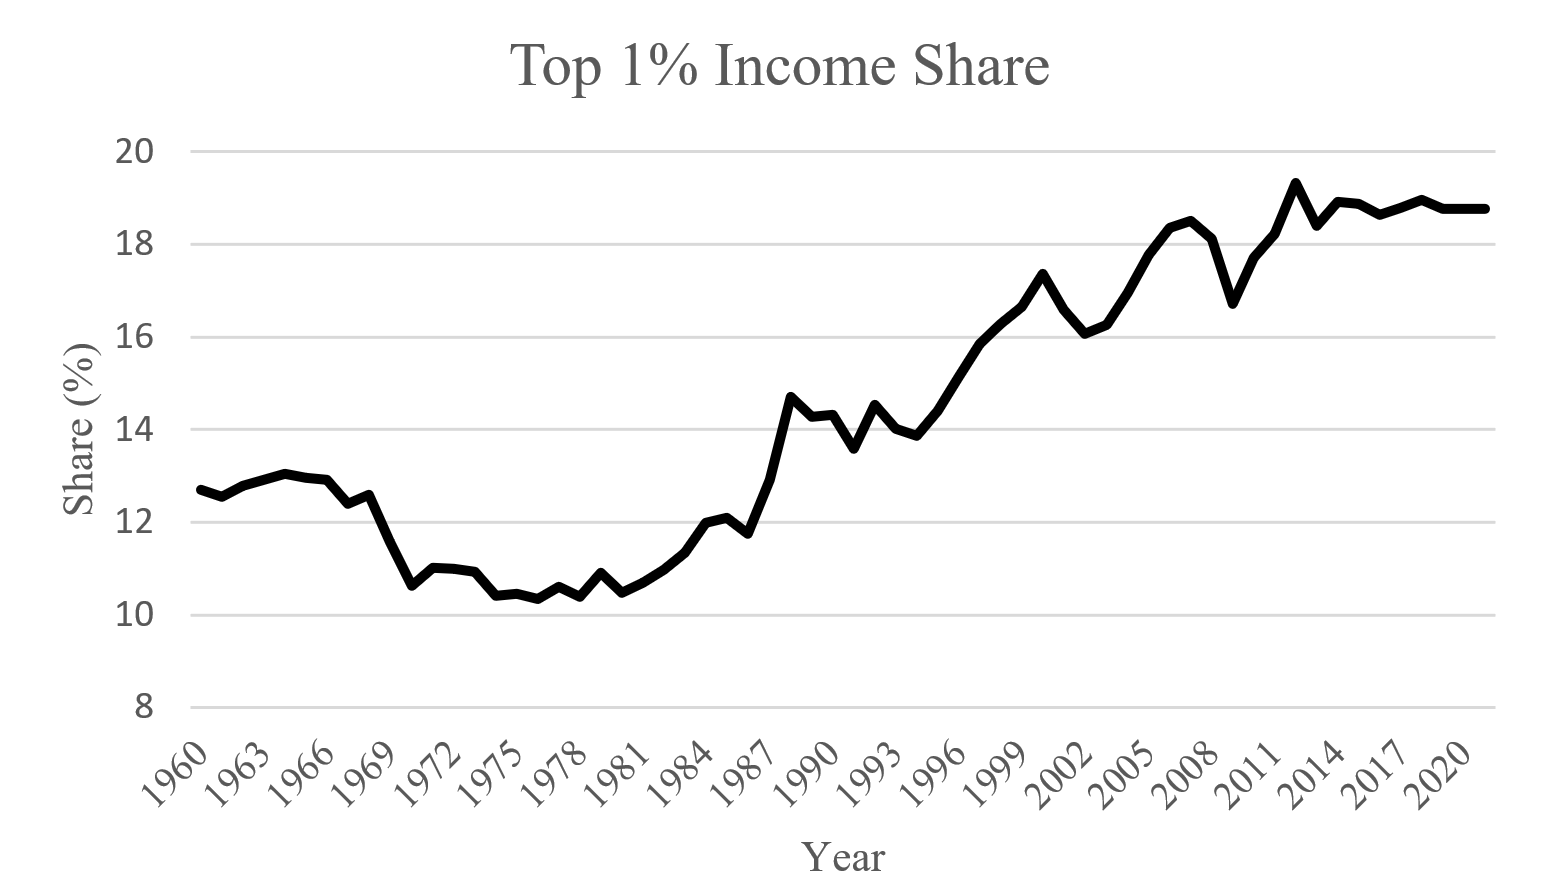 Figure 1. The top 1 percent income share has increased in the United States since the late 1970s. See accessible link for data.